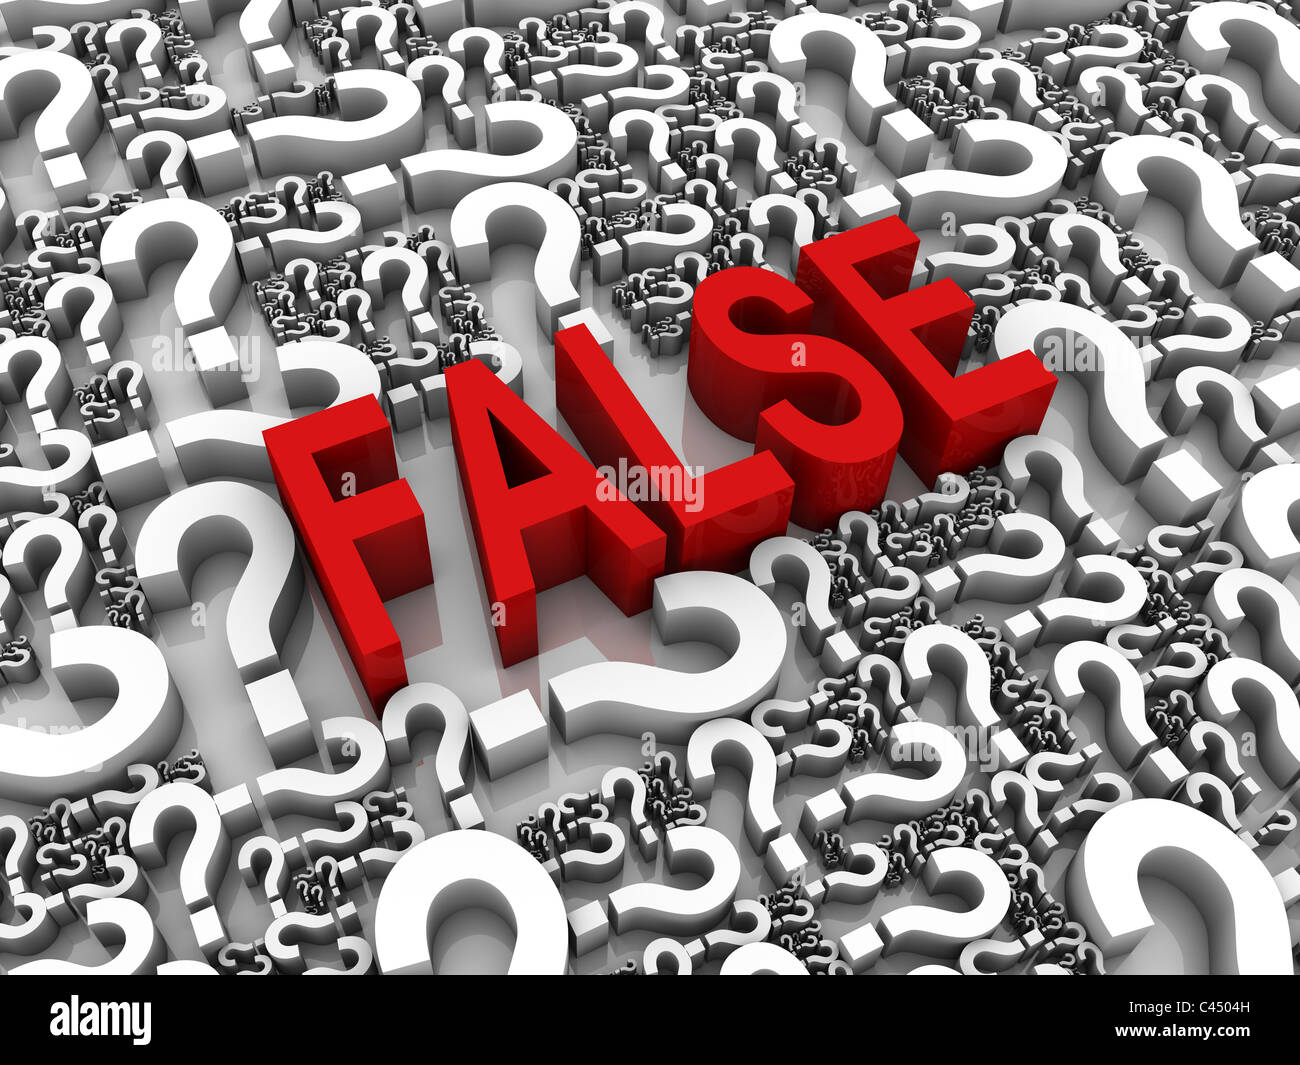 'False' 3D text surrounded by question marks. Part of a series. Stock Photo